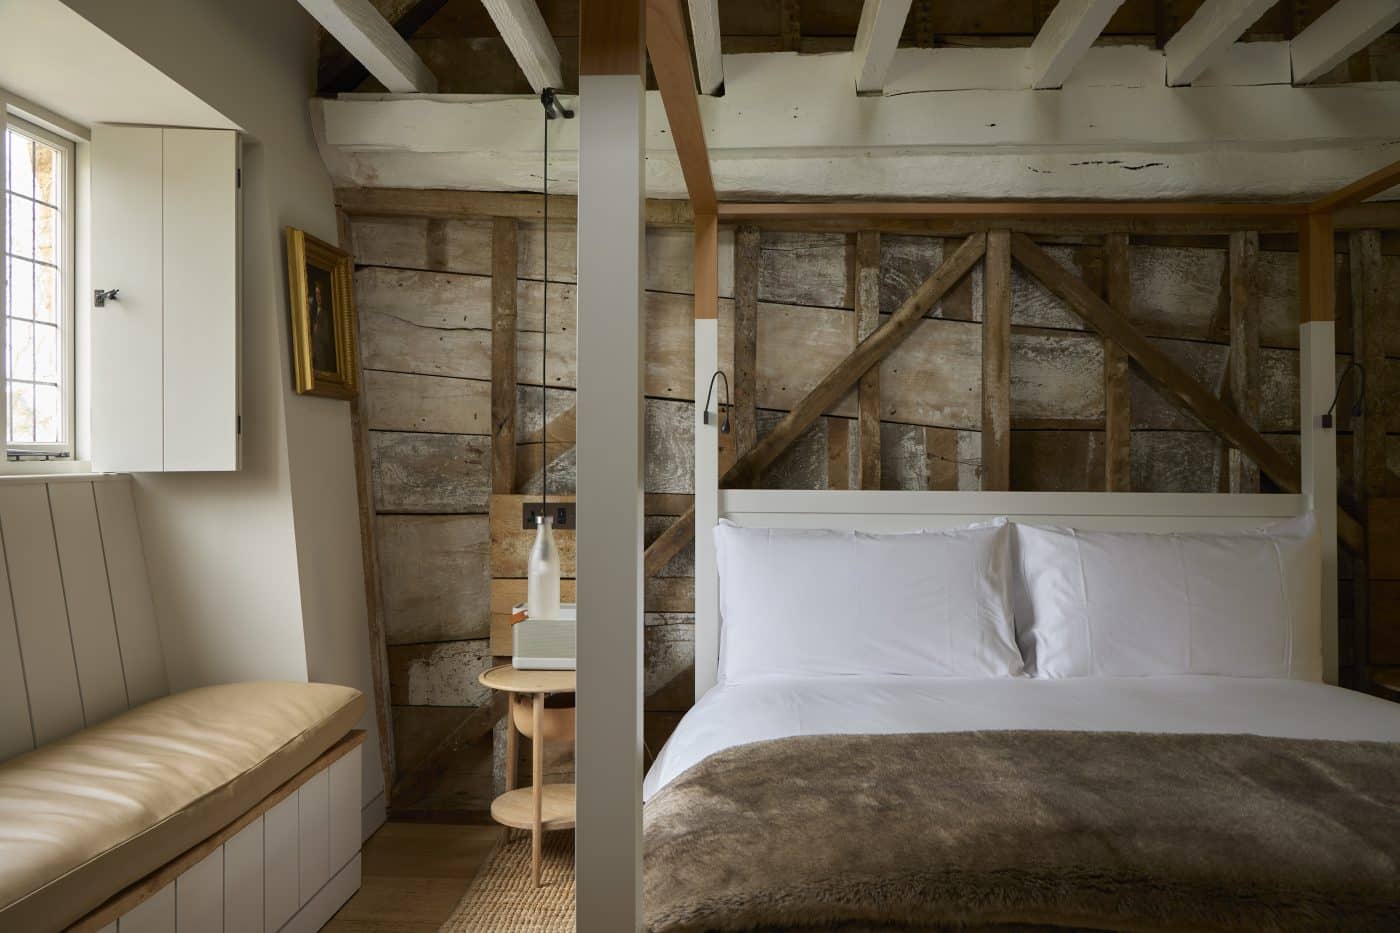 Bedroom in a former cheese-making room at the Farmyard at the Newt